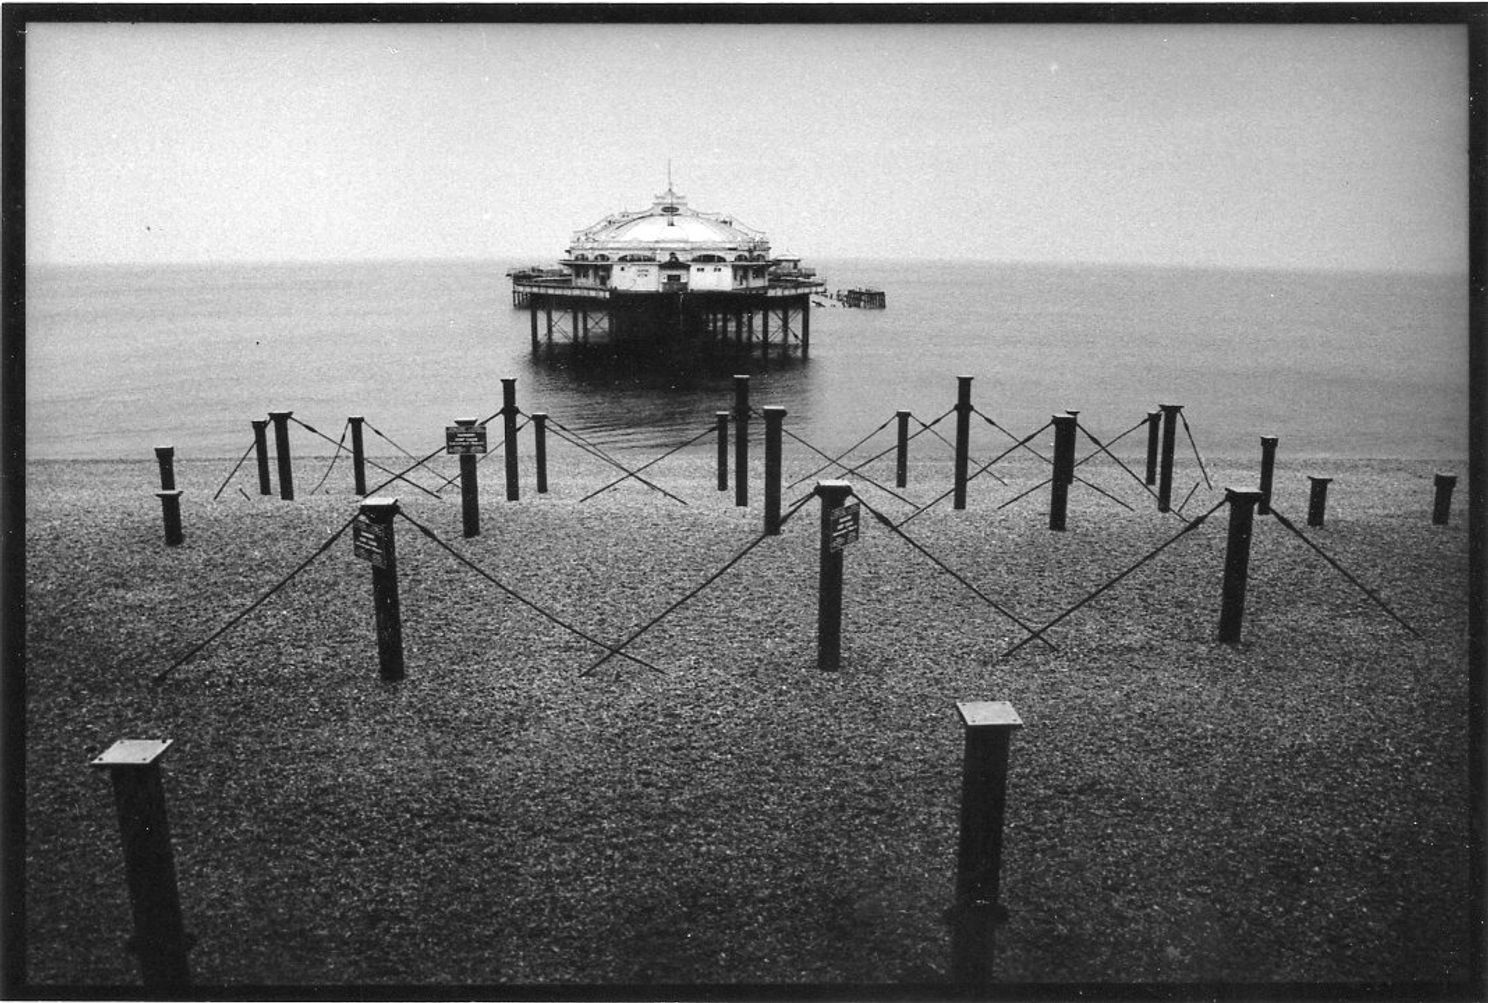 West Pier Brighton from the beach. Scan from 35mm Ilford HP5 negative. Shot  around 1995